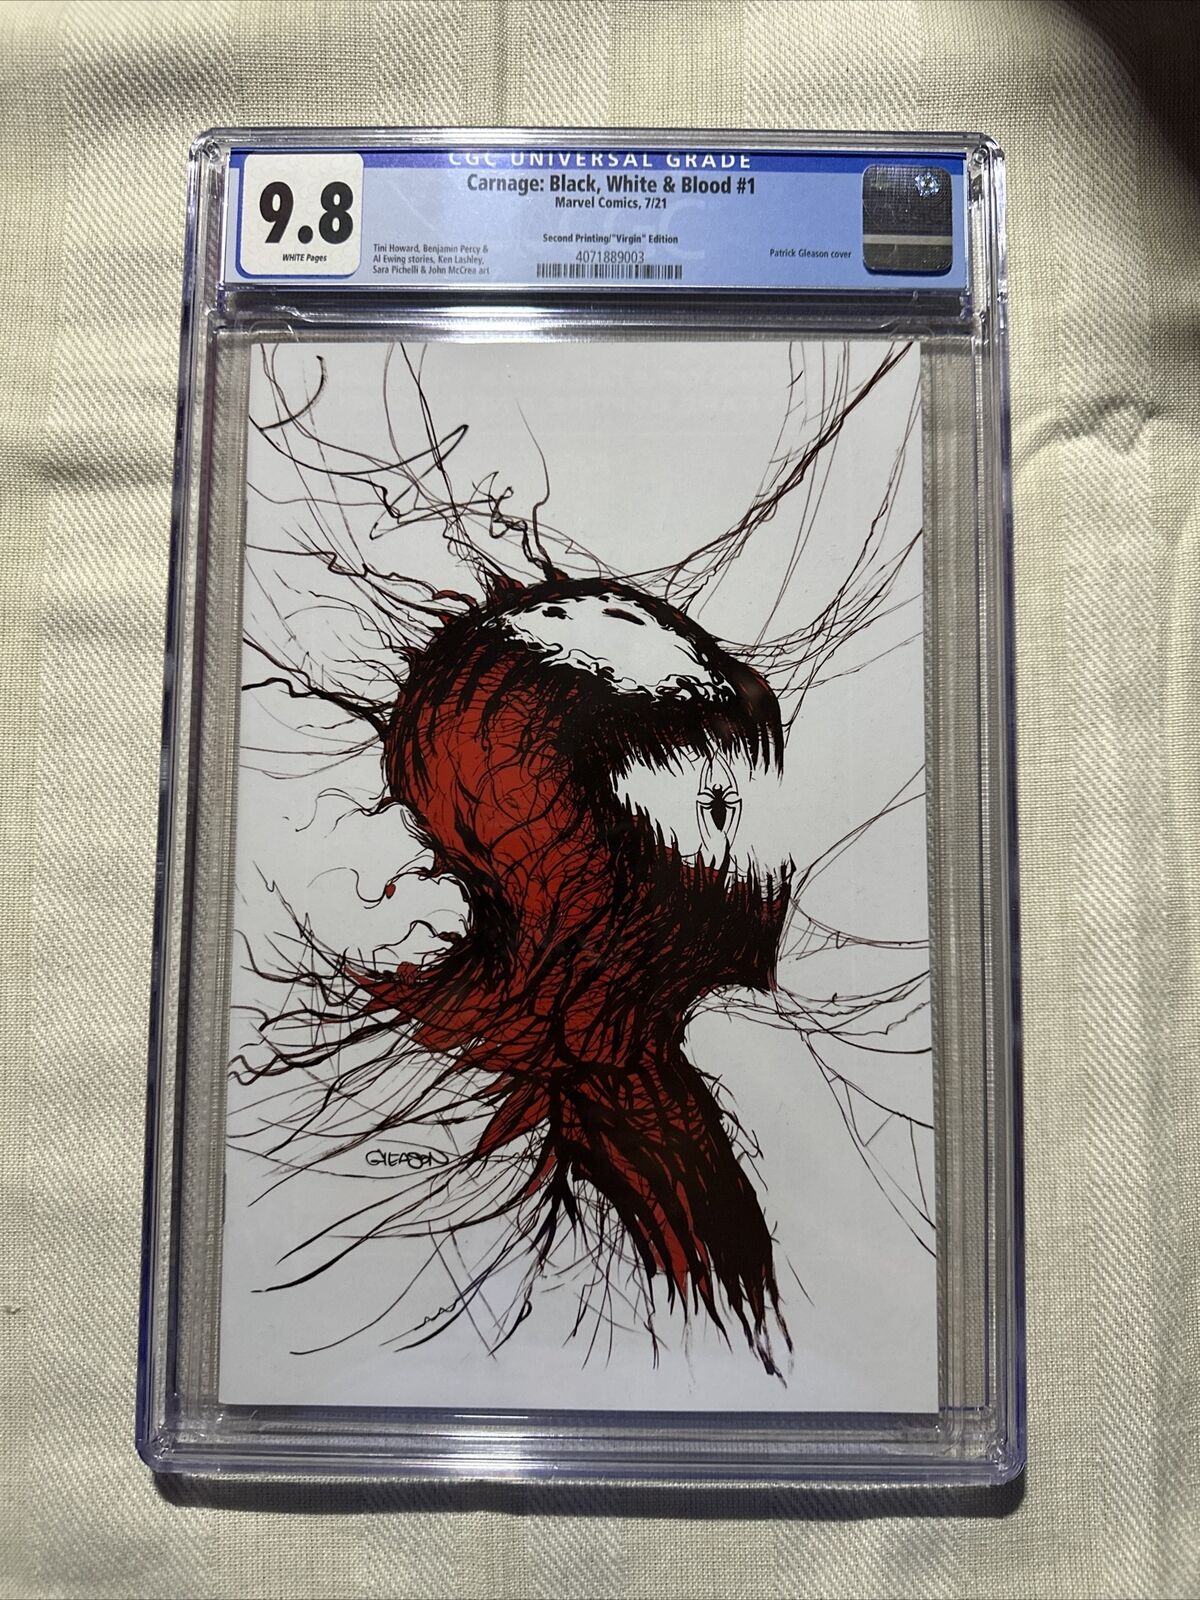 CARNAGE BLACK WHITE AND BLOOD #1 CGC 9.8 Gleason Covers